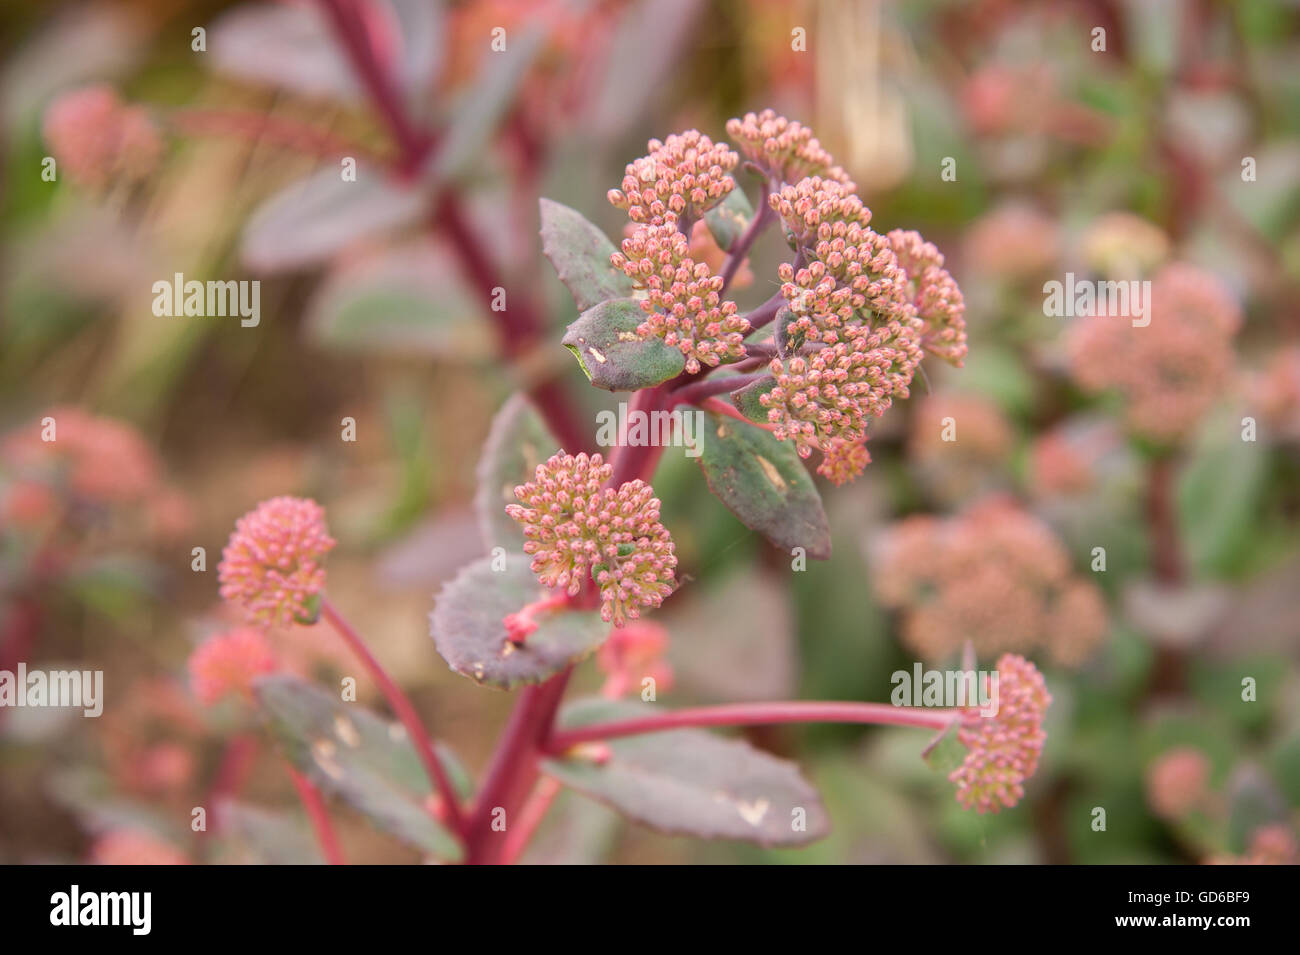 Detailed image of a red sedum in flower photographed in the summer season Stock Photo